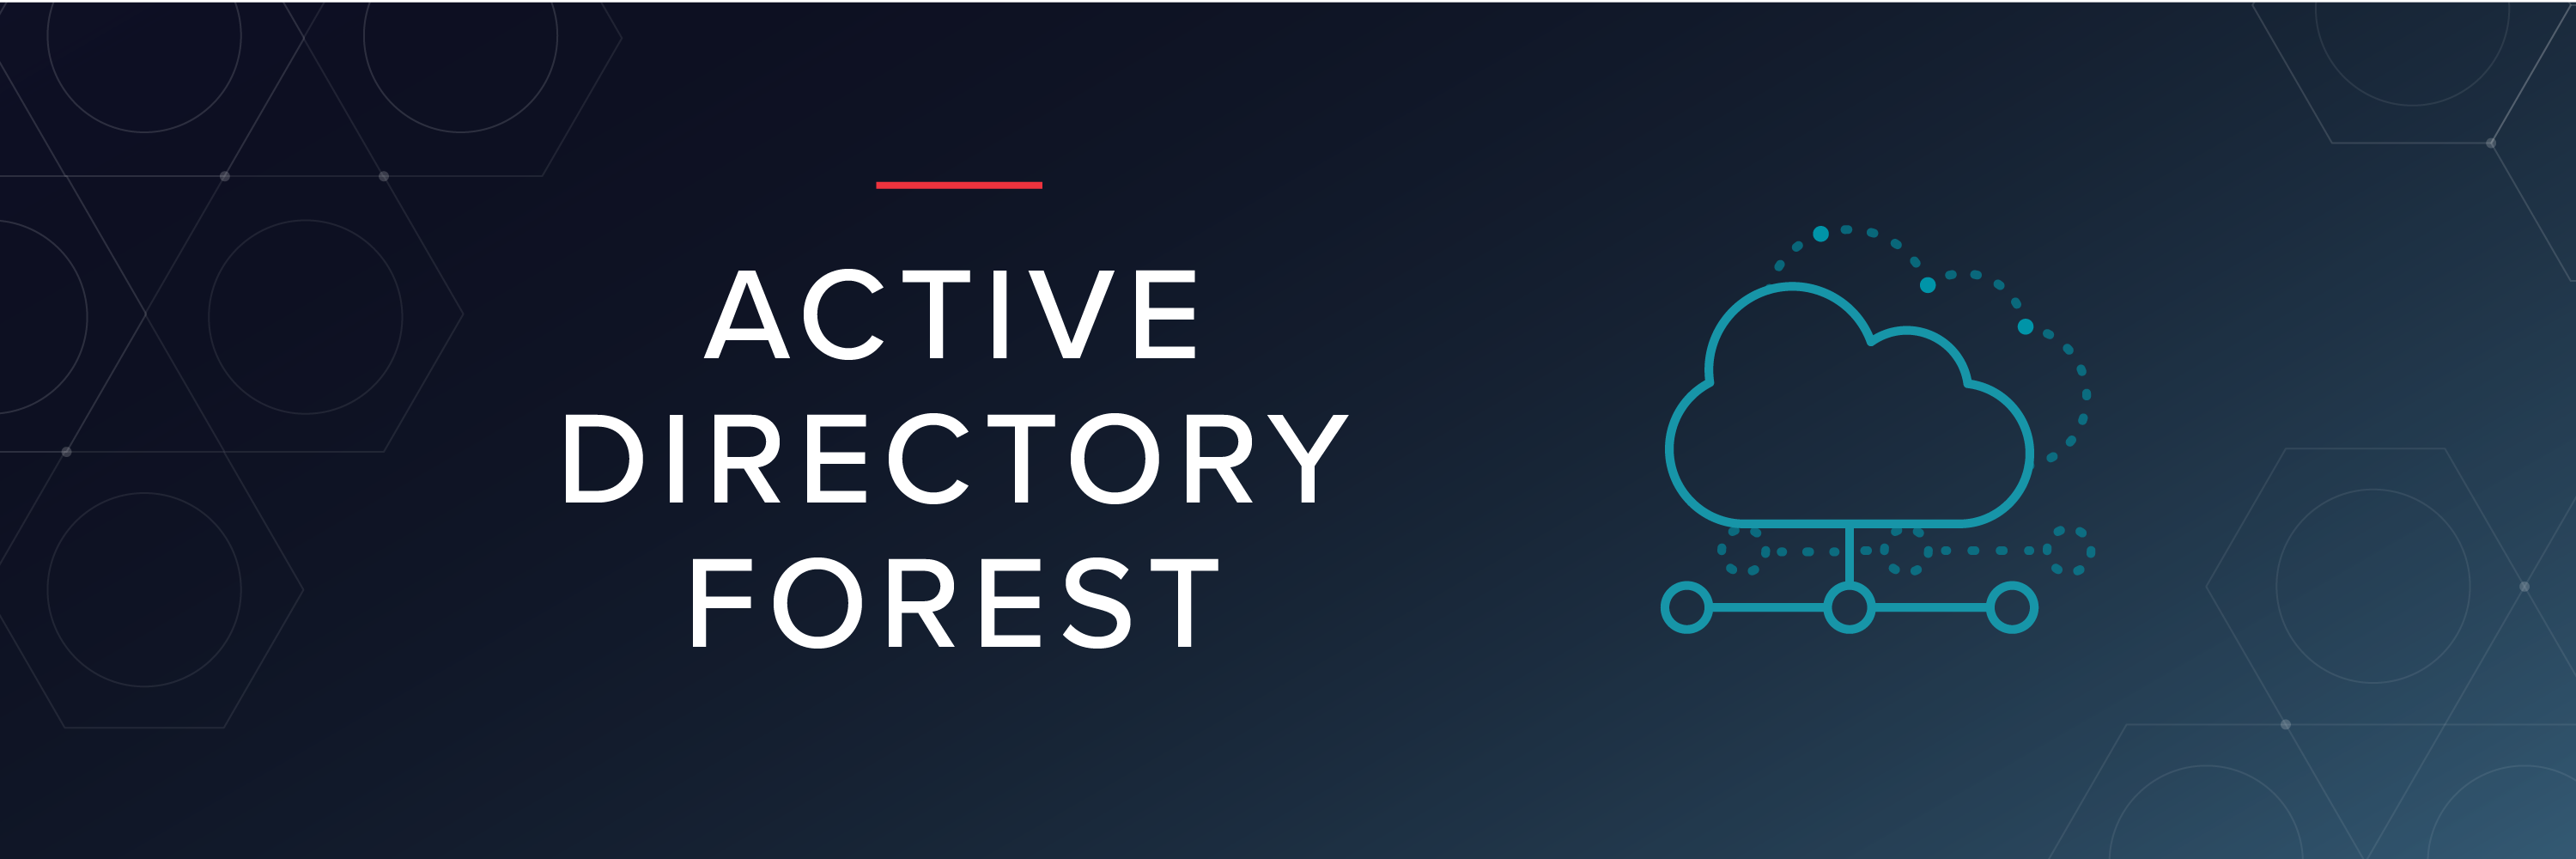 What is an Active Directory Forest?